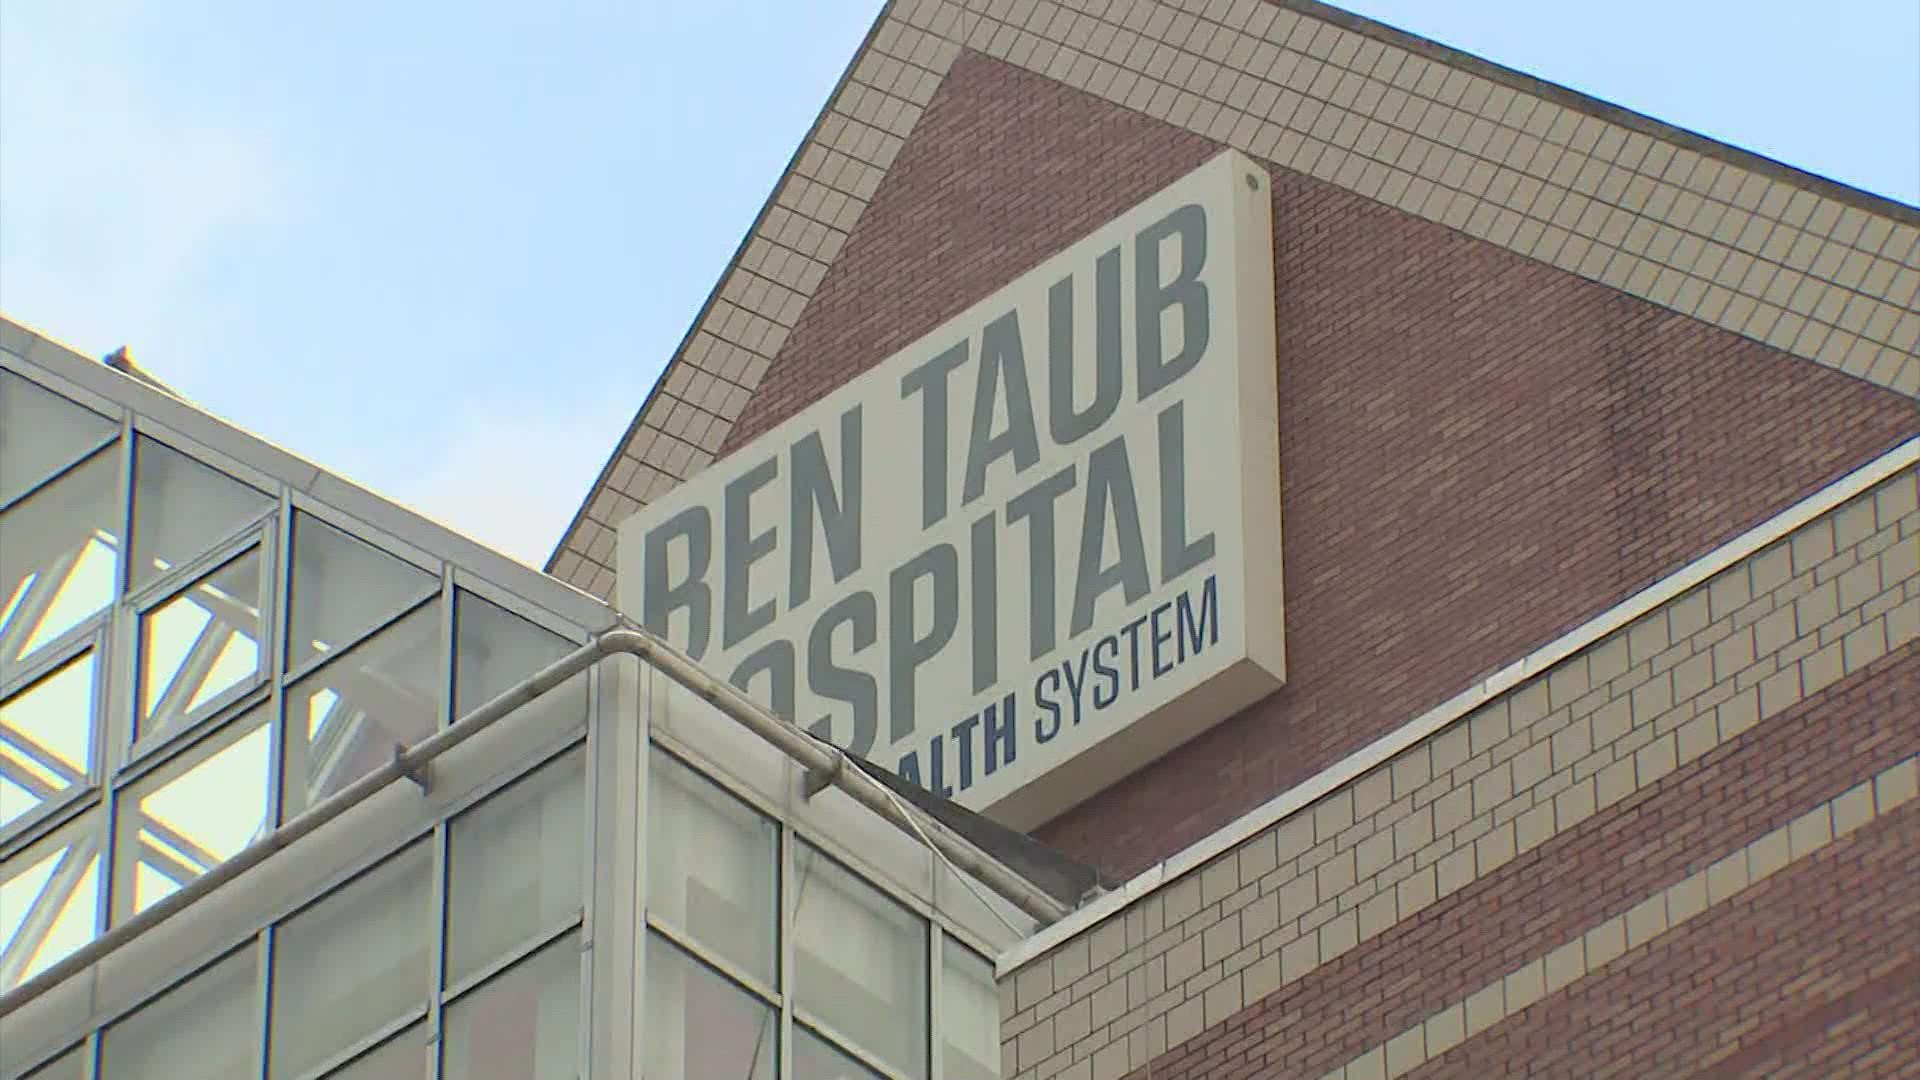 The hospital said it went into lockdown mode after receiving a "credible threat" on Tuesday. It was lifted at about 3:20 p.m.